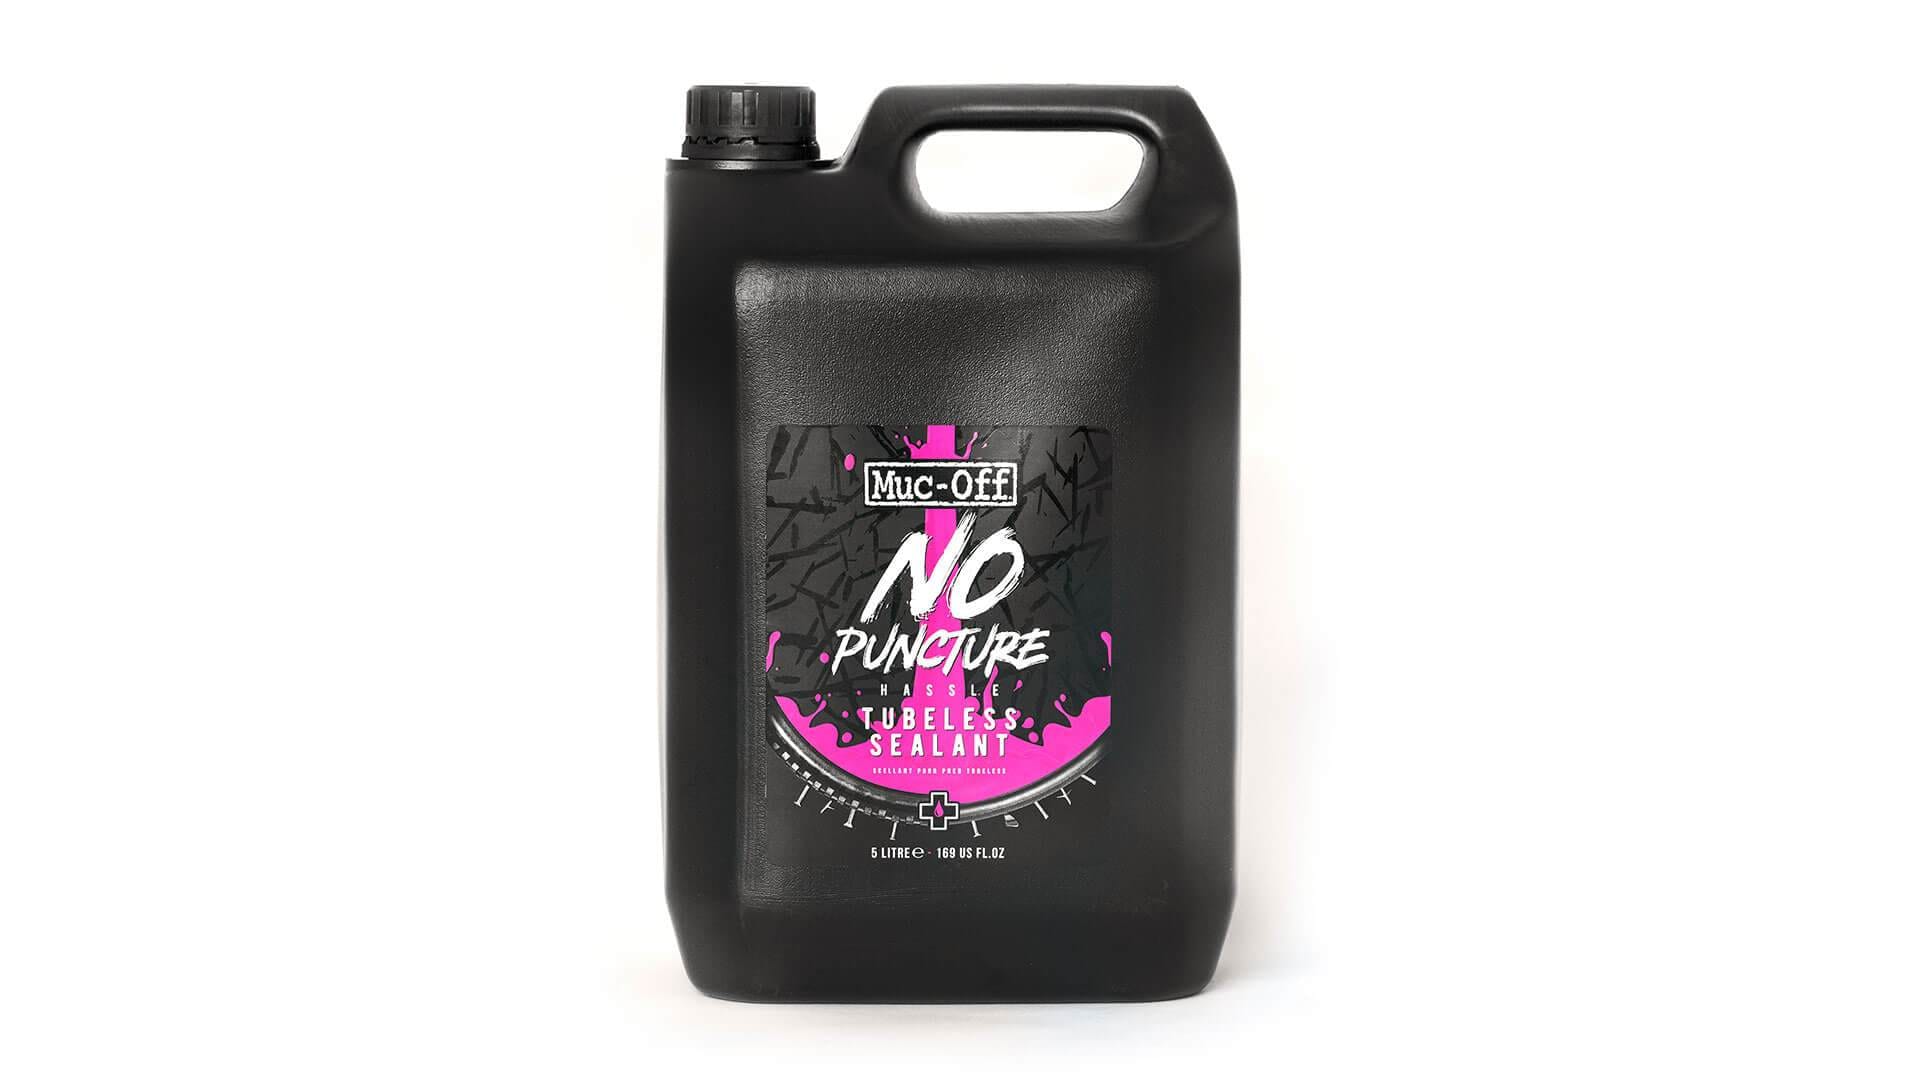 Muc-Off Punkteringsskydd, No Puncture Hassle Tubeless Sealant, Diverse  Volymalternativ